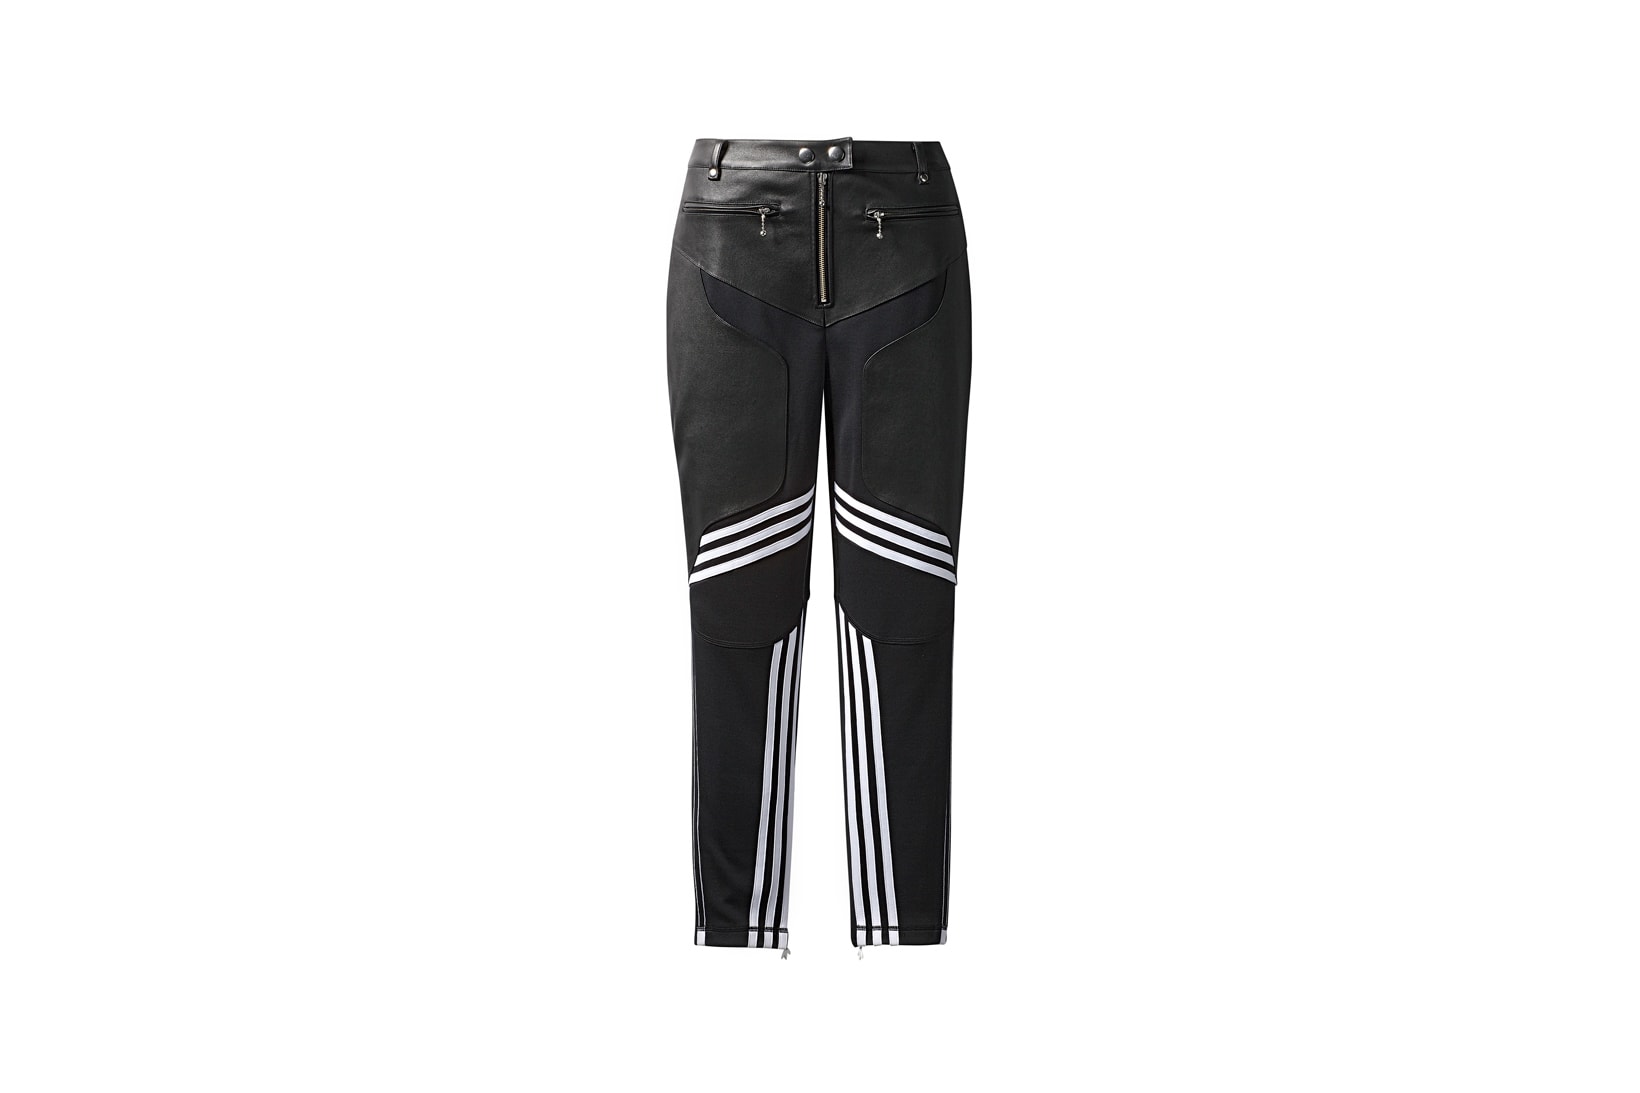 Alexander Wang adidas Originals Spring Summer 2018 Capsule Collection Leather Pants